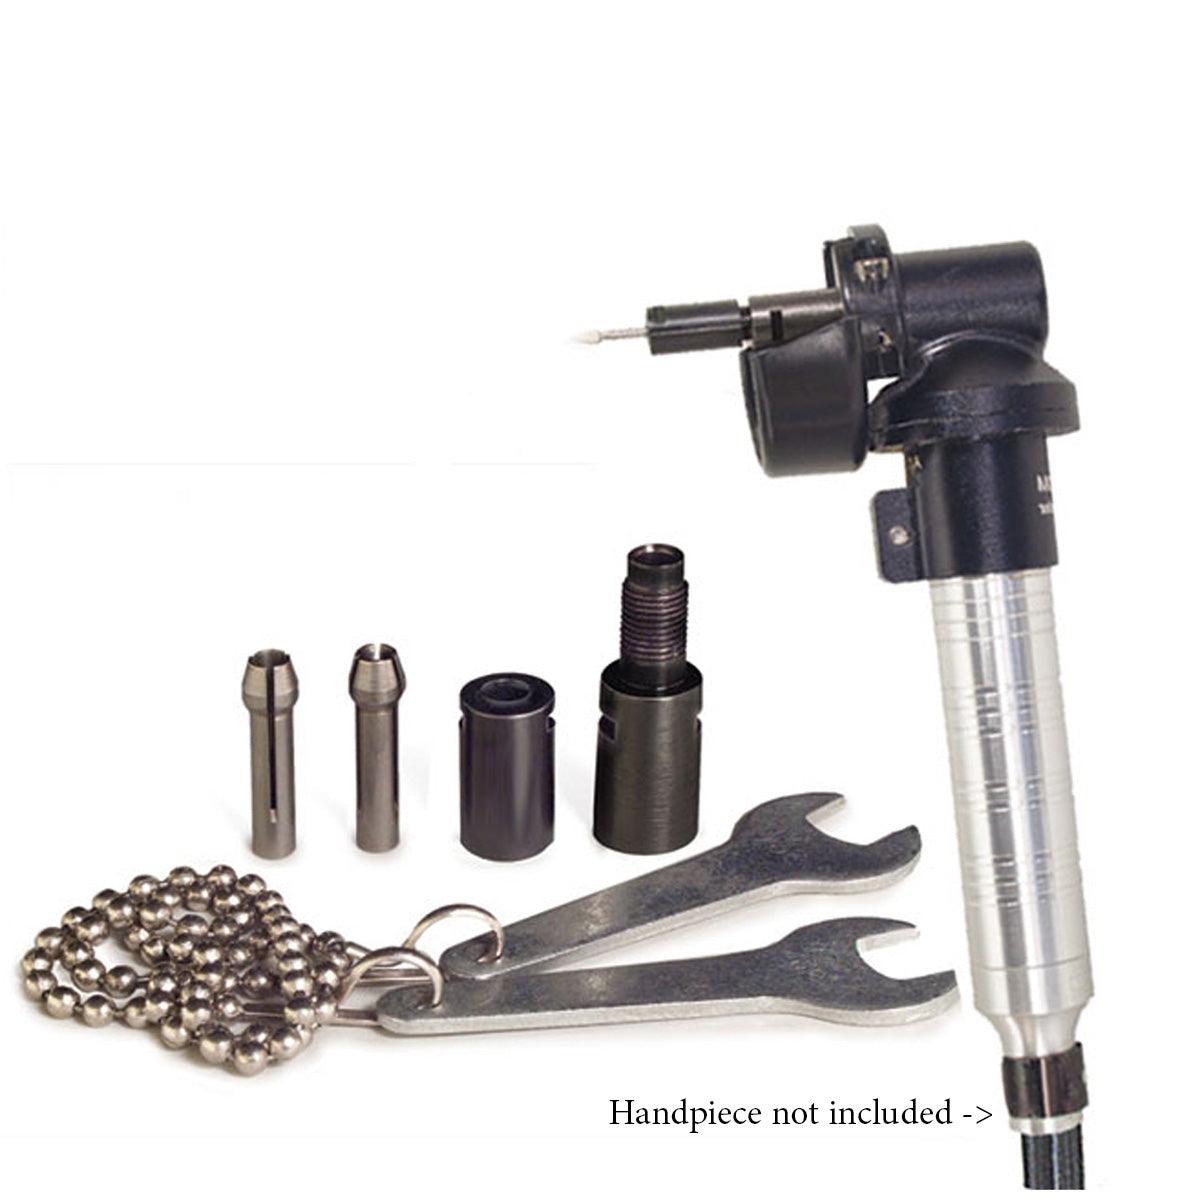 Foredom A-69224 Right Angle Attachment-Use with Foredom Angle Grinder & H.30 Foredom Handpiece 